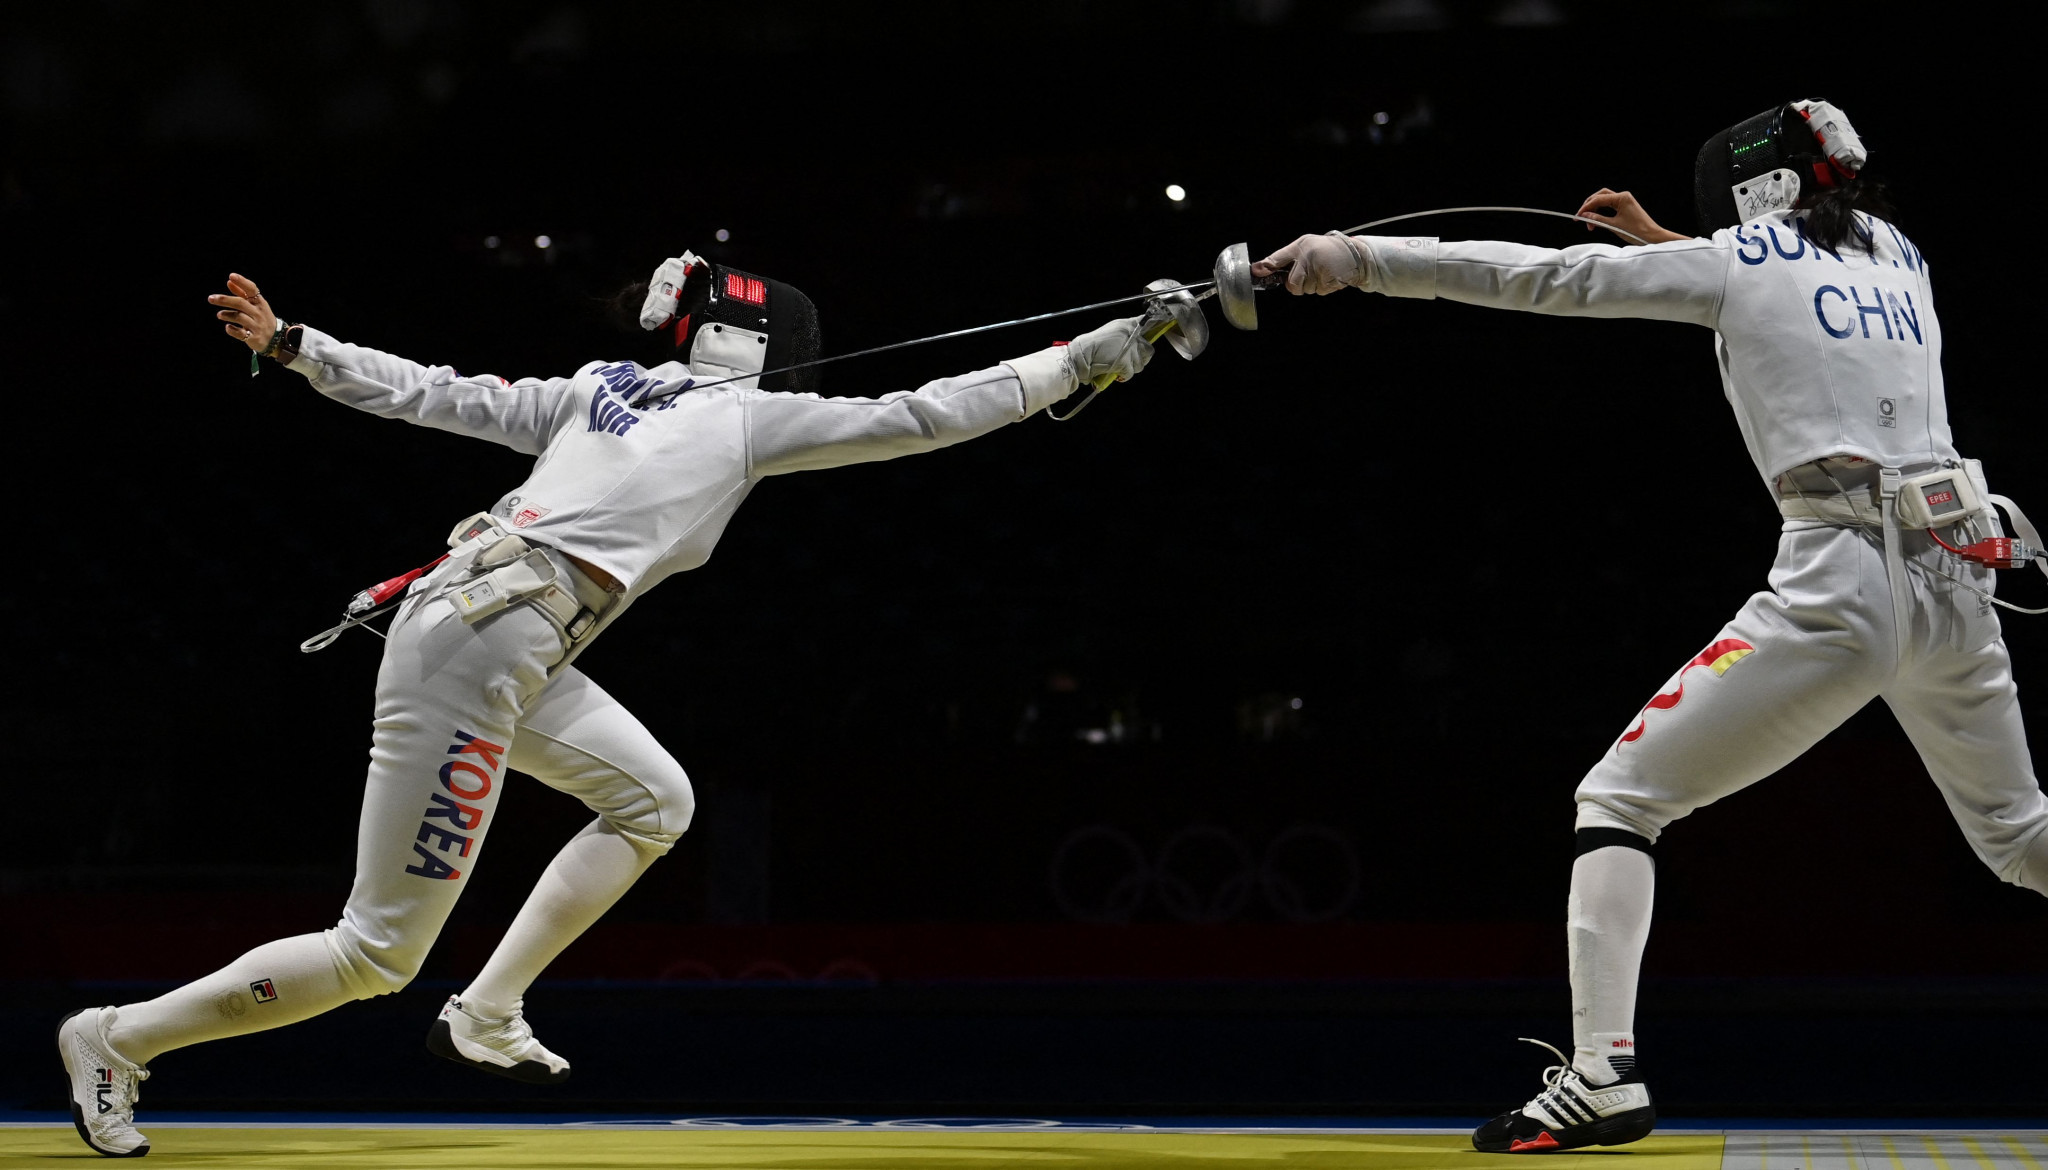 Sun Yiwen, right, plans to be fully fit by April 3 when qualification for next year's fencing competition at the Olympic Games in Paris is due to start ©Getty Images